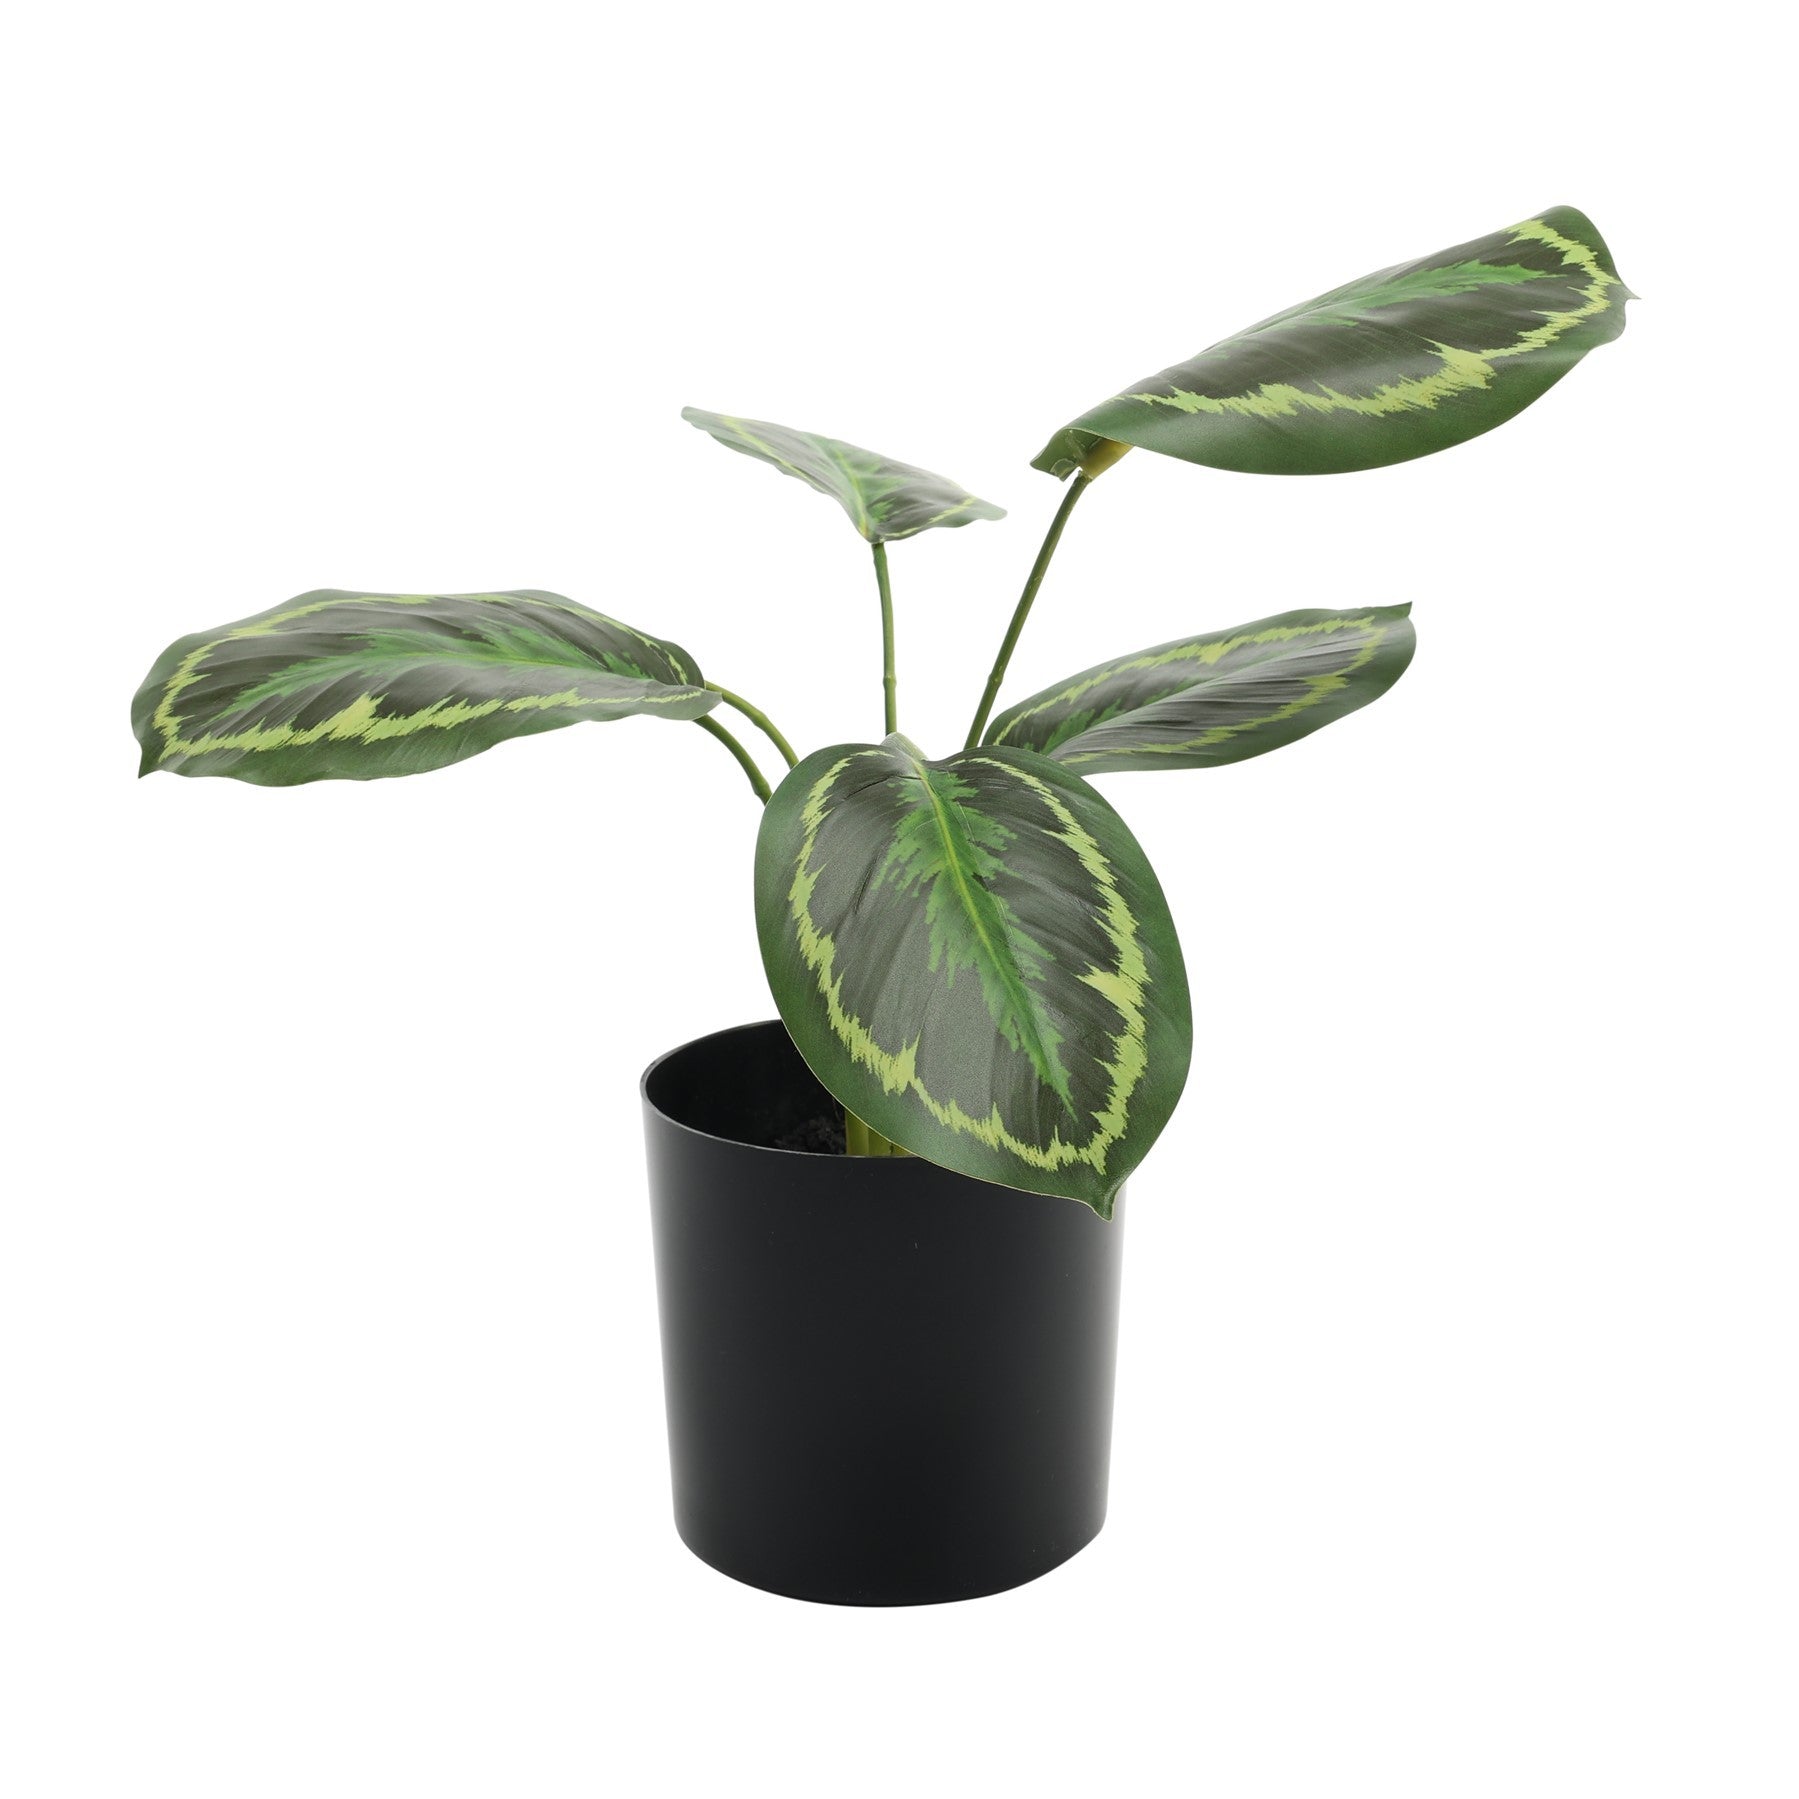 View Ctenanthe Potted House Plant 34cm information